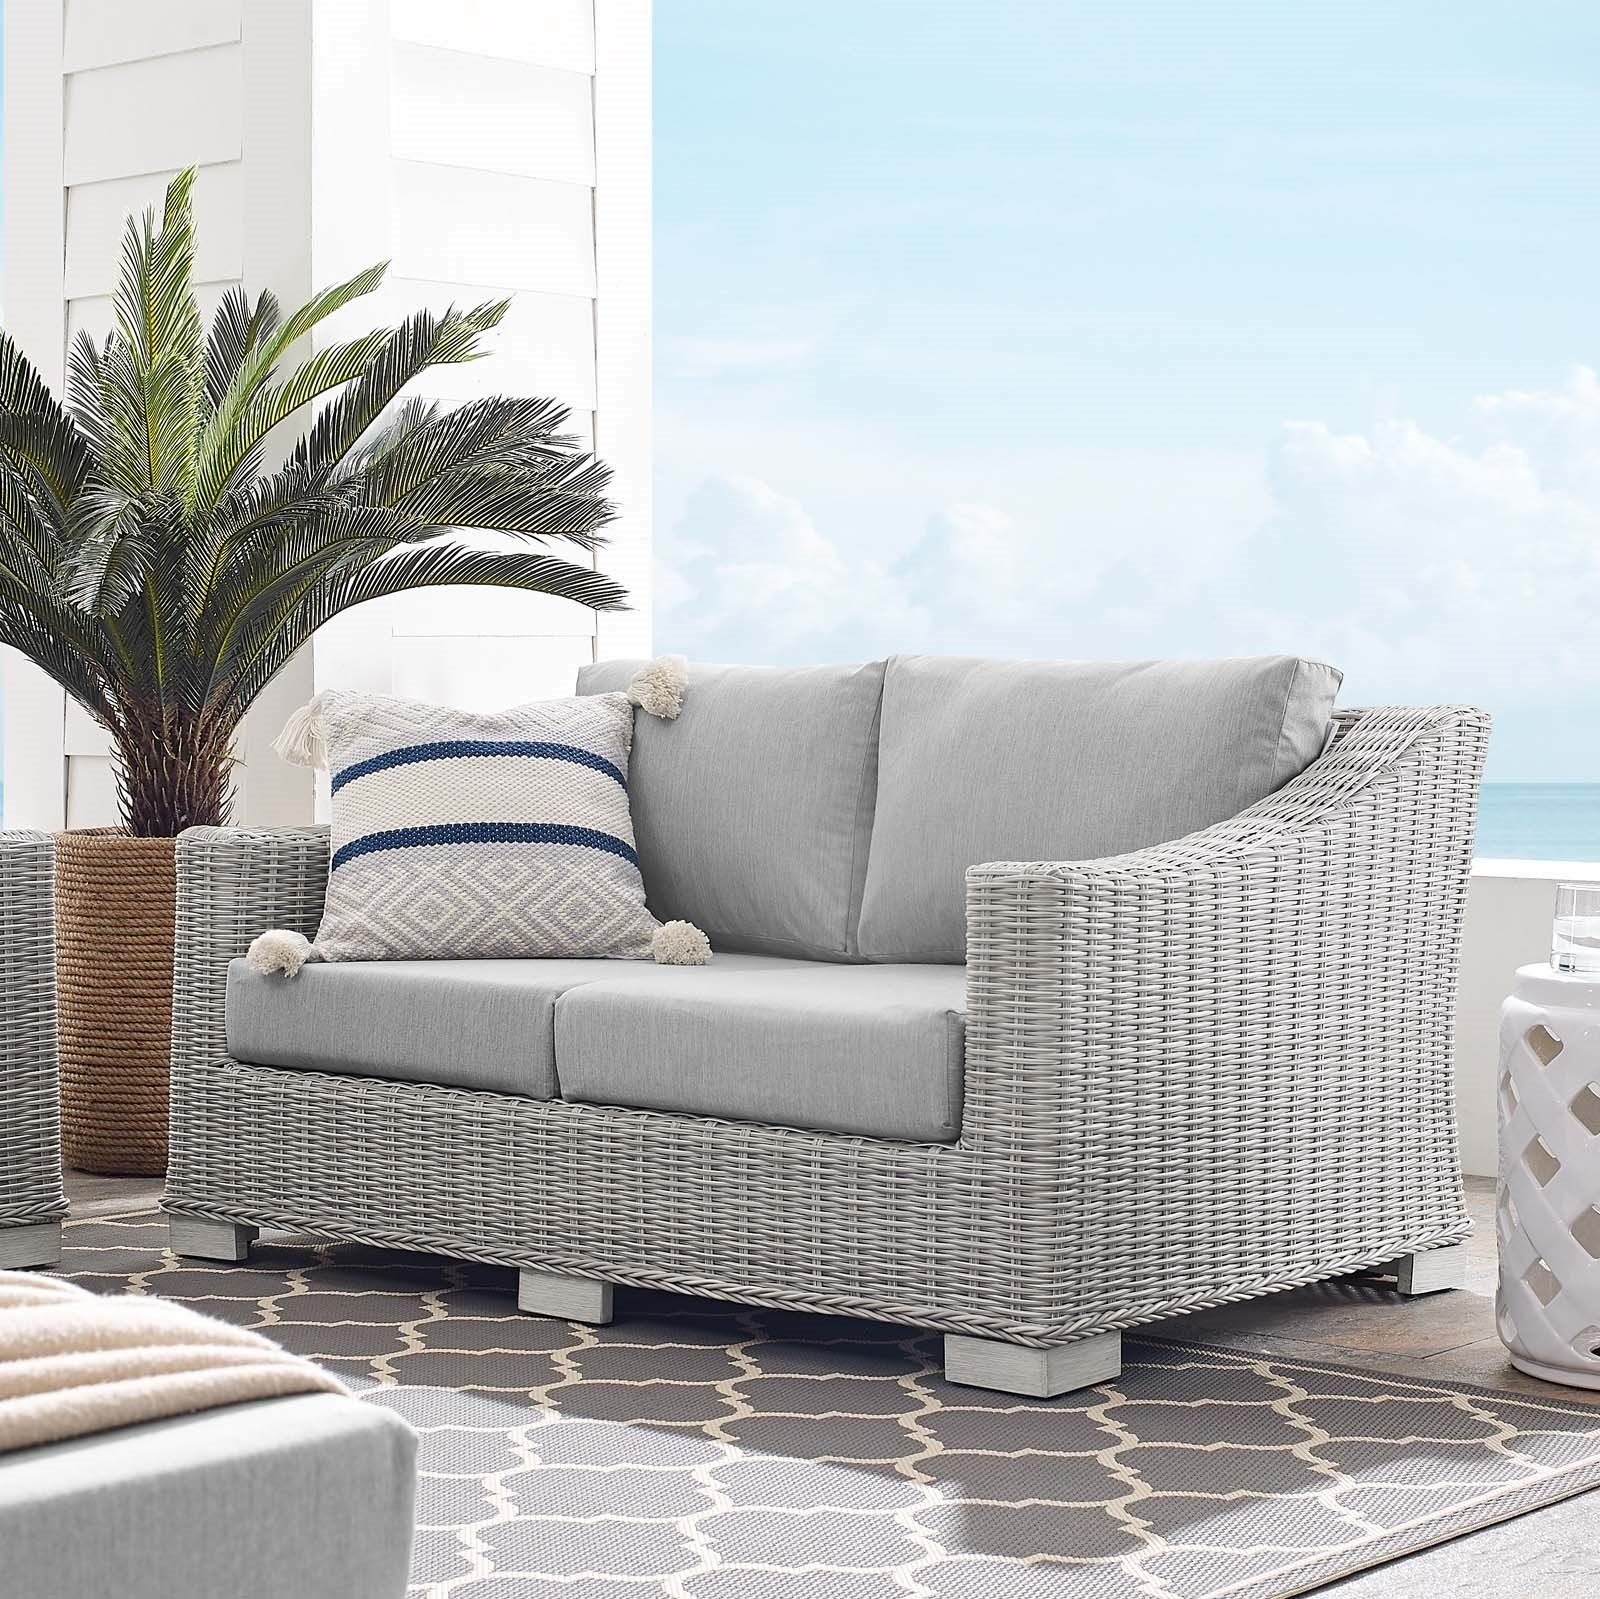 Conway Outdoor Patio Wicker Rattan Loveseat In Light Gray Gray – Hyme With Outdoor Wicker Gray Cushion Patio Sets (View 6 of 15)